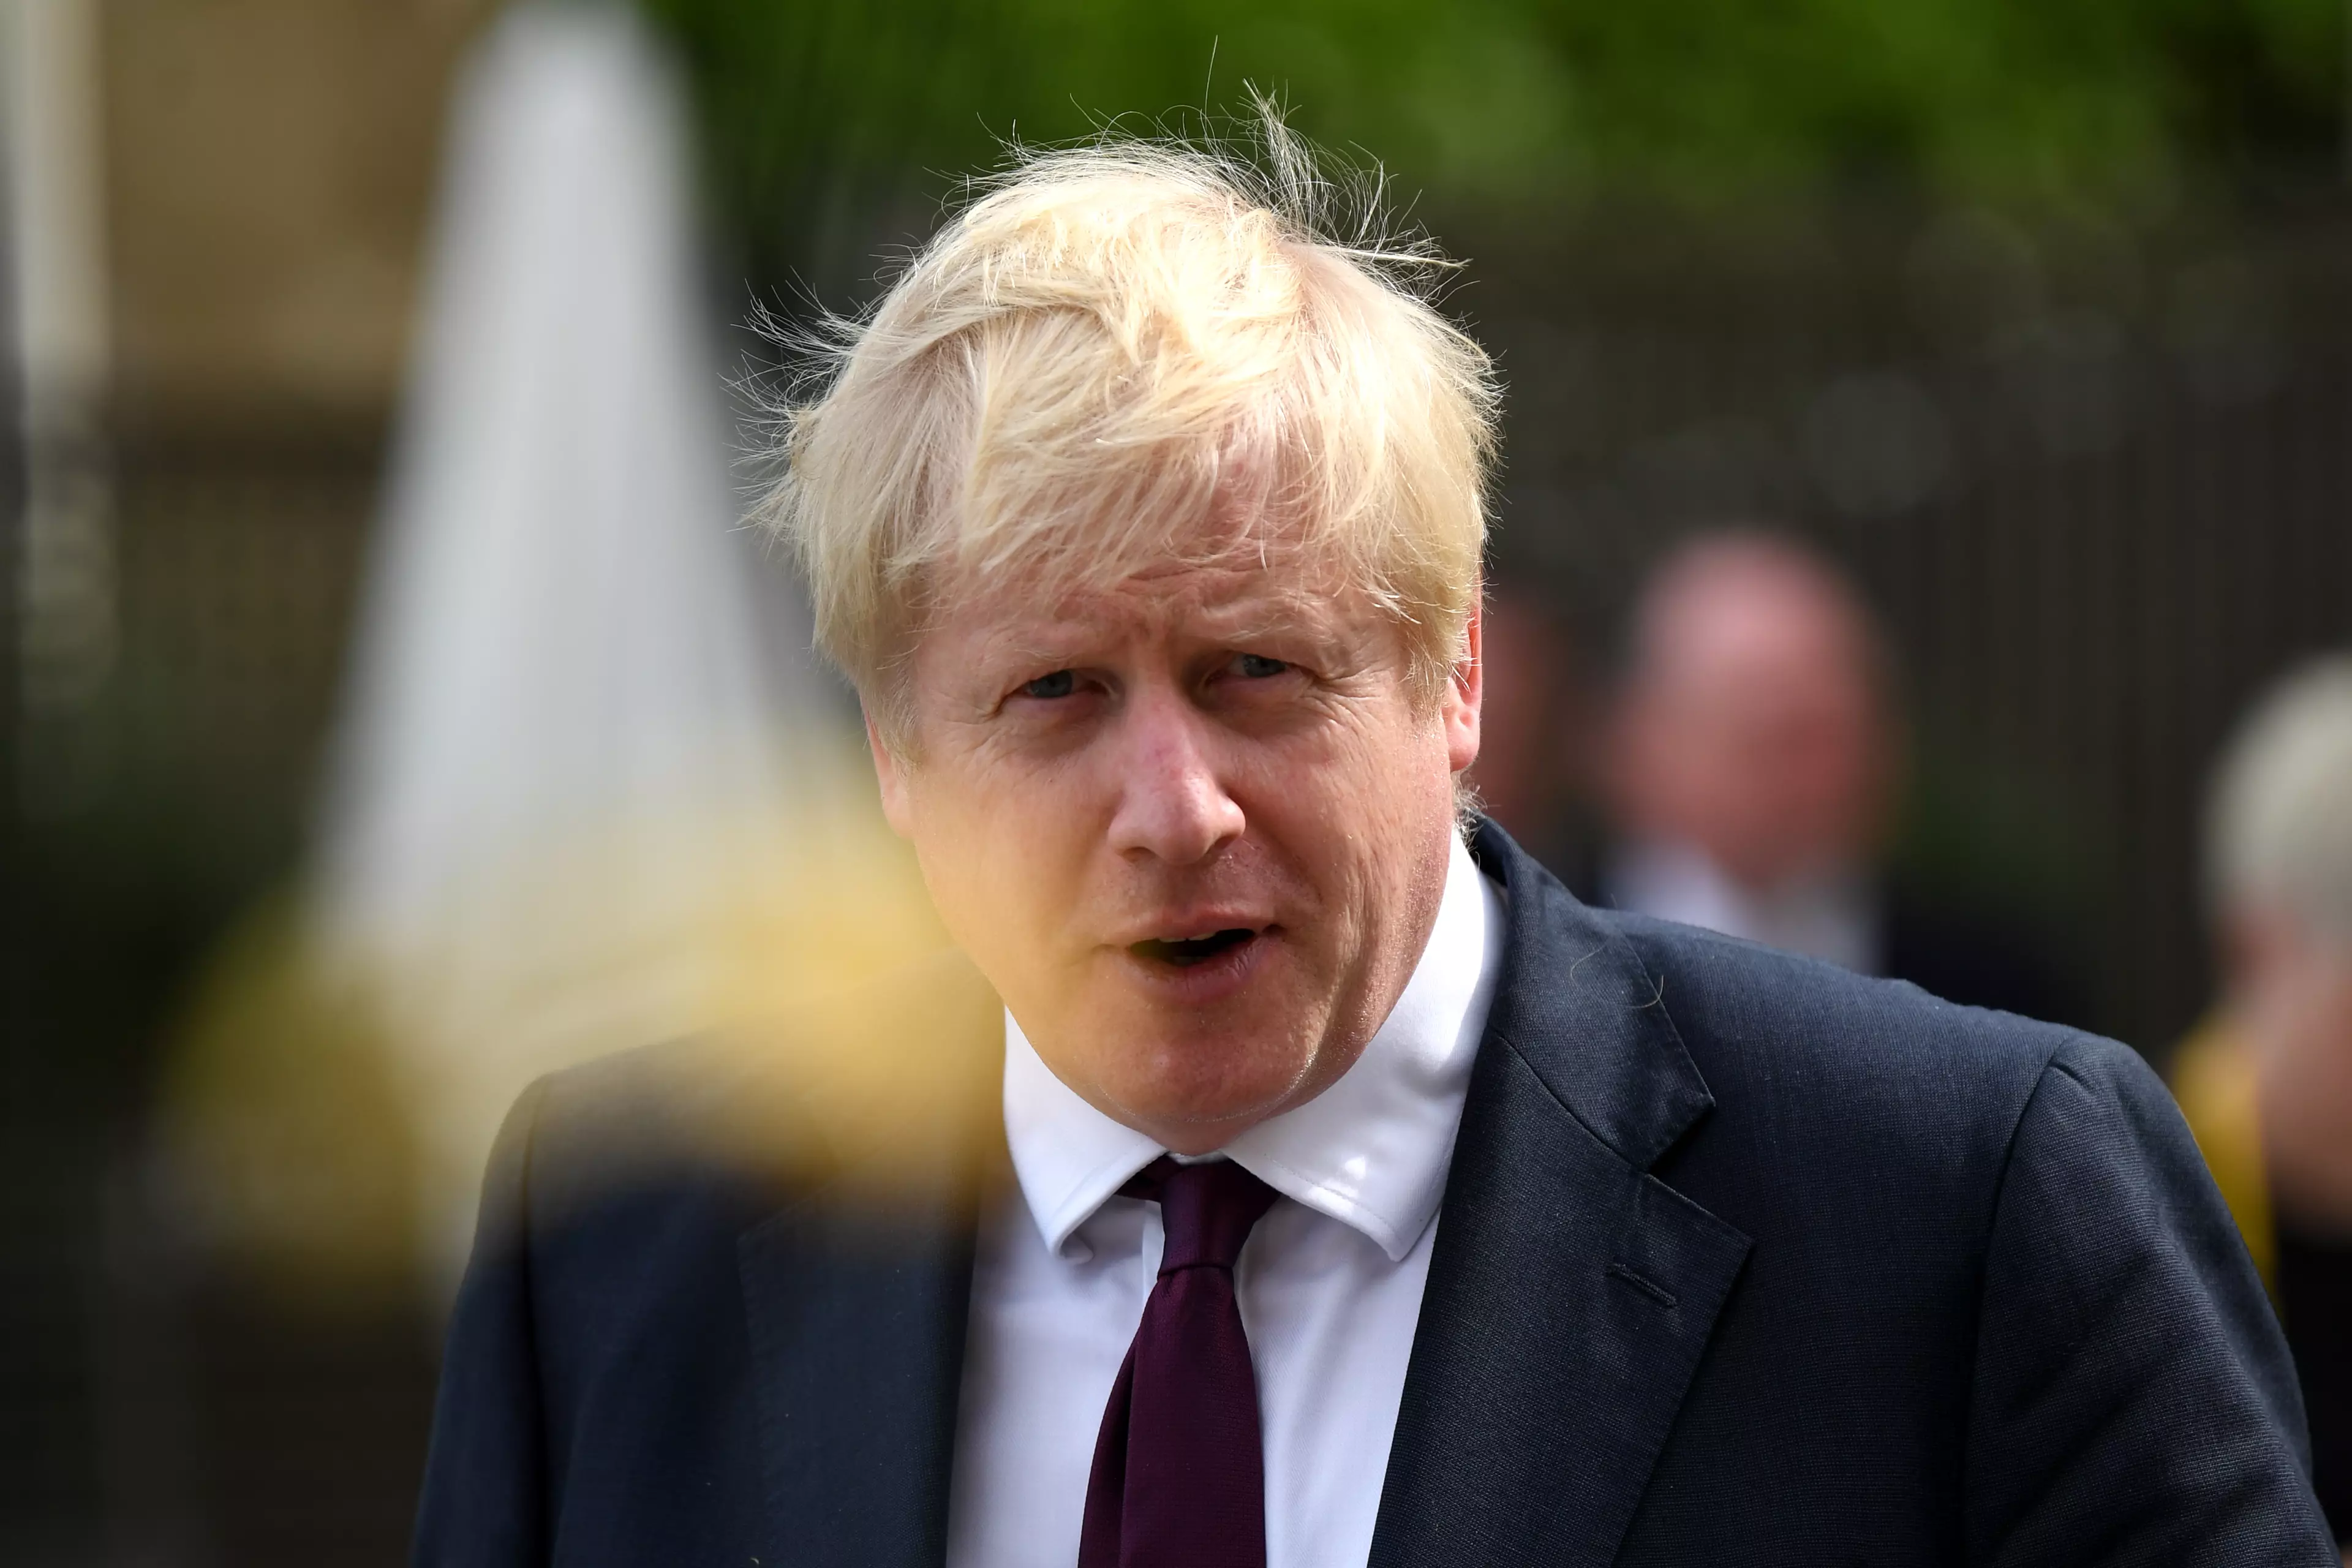 PM Boris Johnson has said the new tech will help in 'securing the UK's position as a global hub for trade, tourism and investment'.